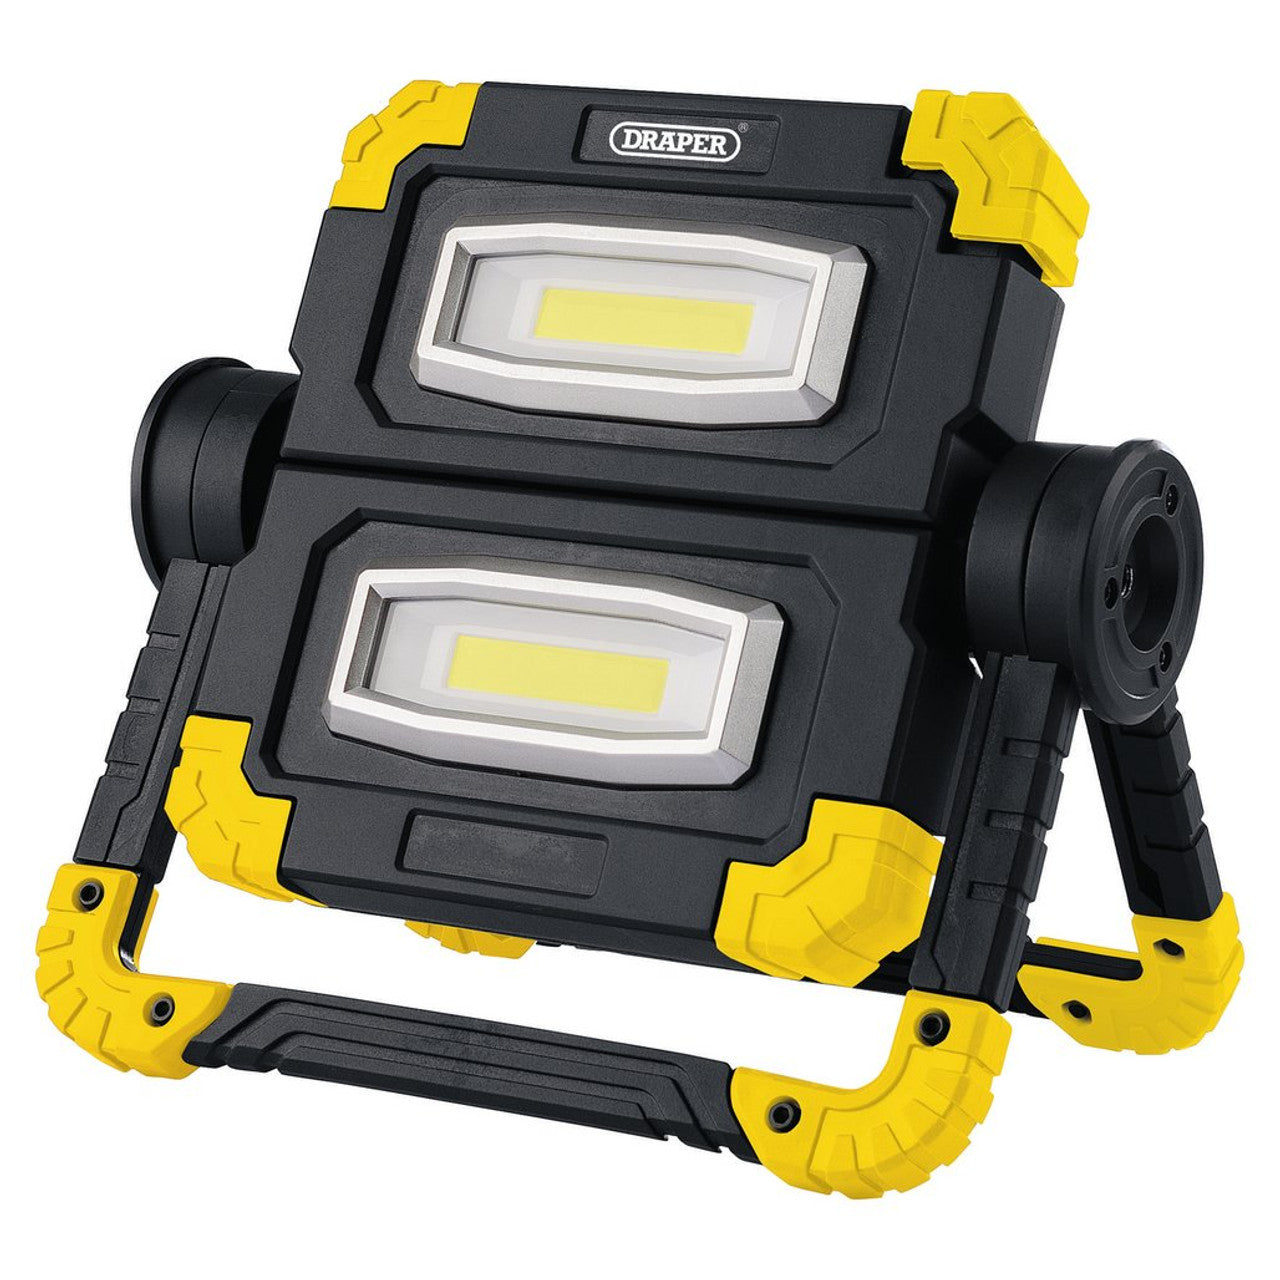 Draper 87696 Twin COB LED Rechargeable Worklight, 10W, 850 Lumens